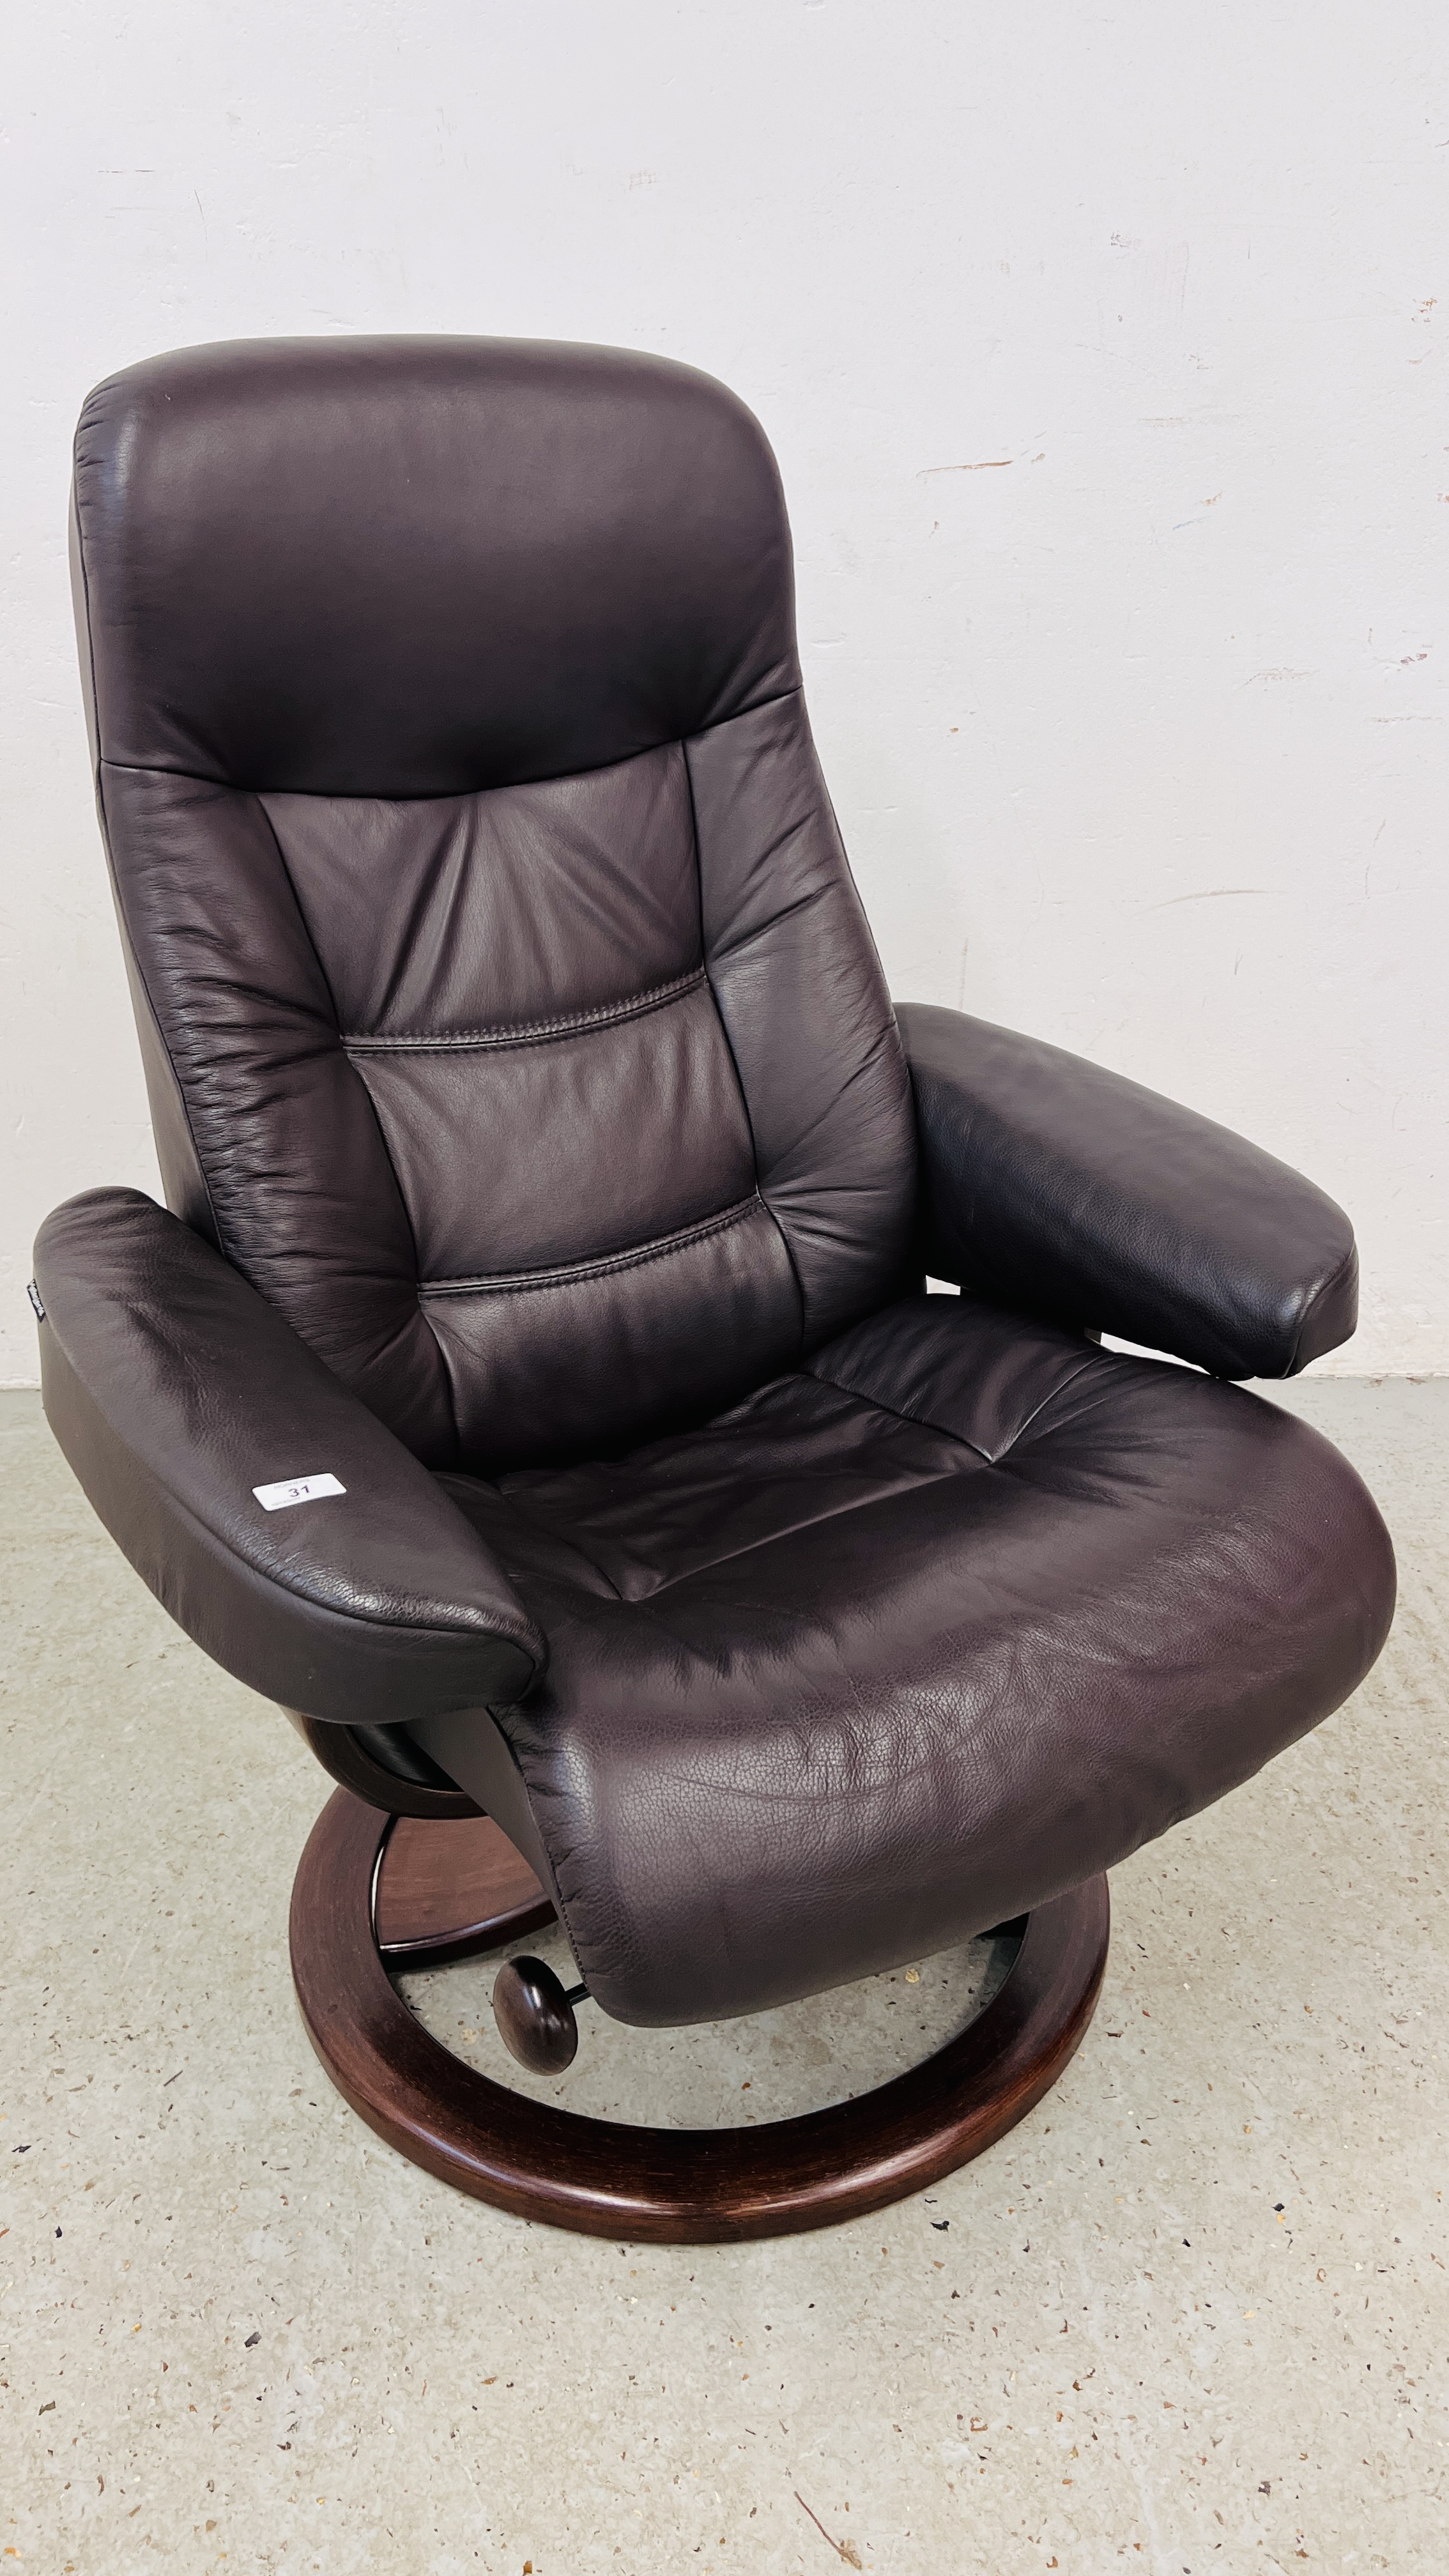 A BROWN LEATHER RELAXER CHAIR